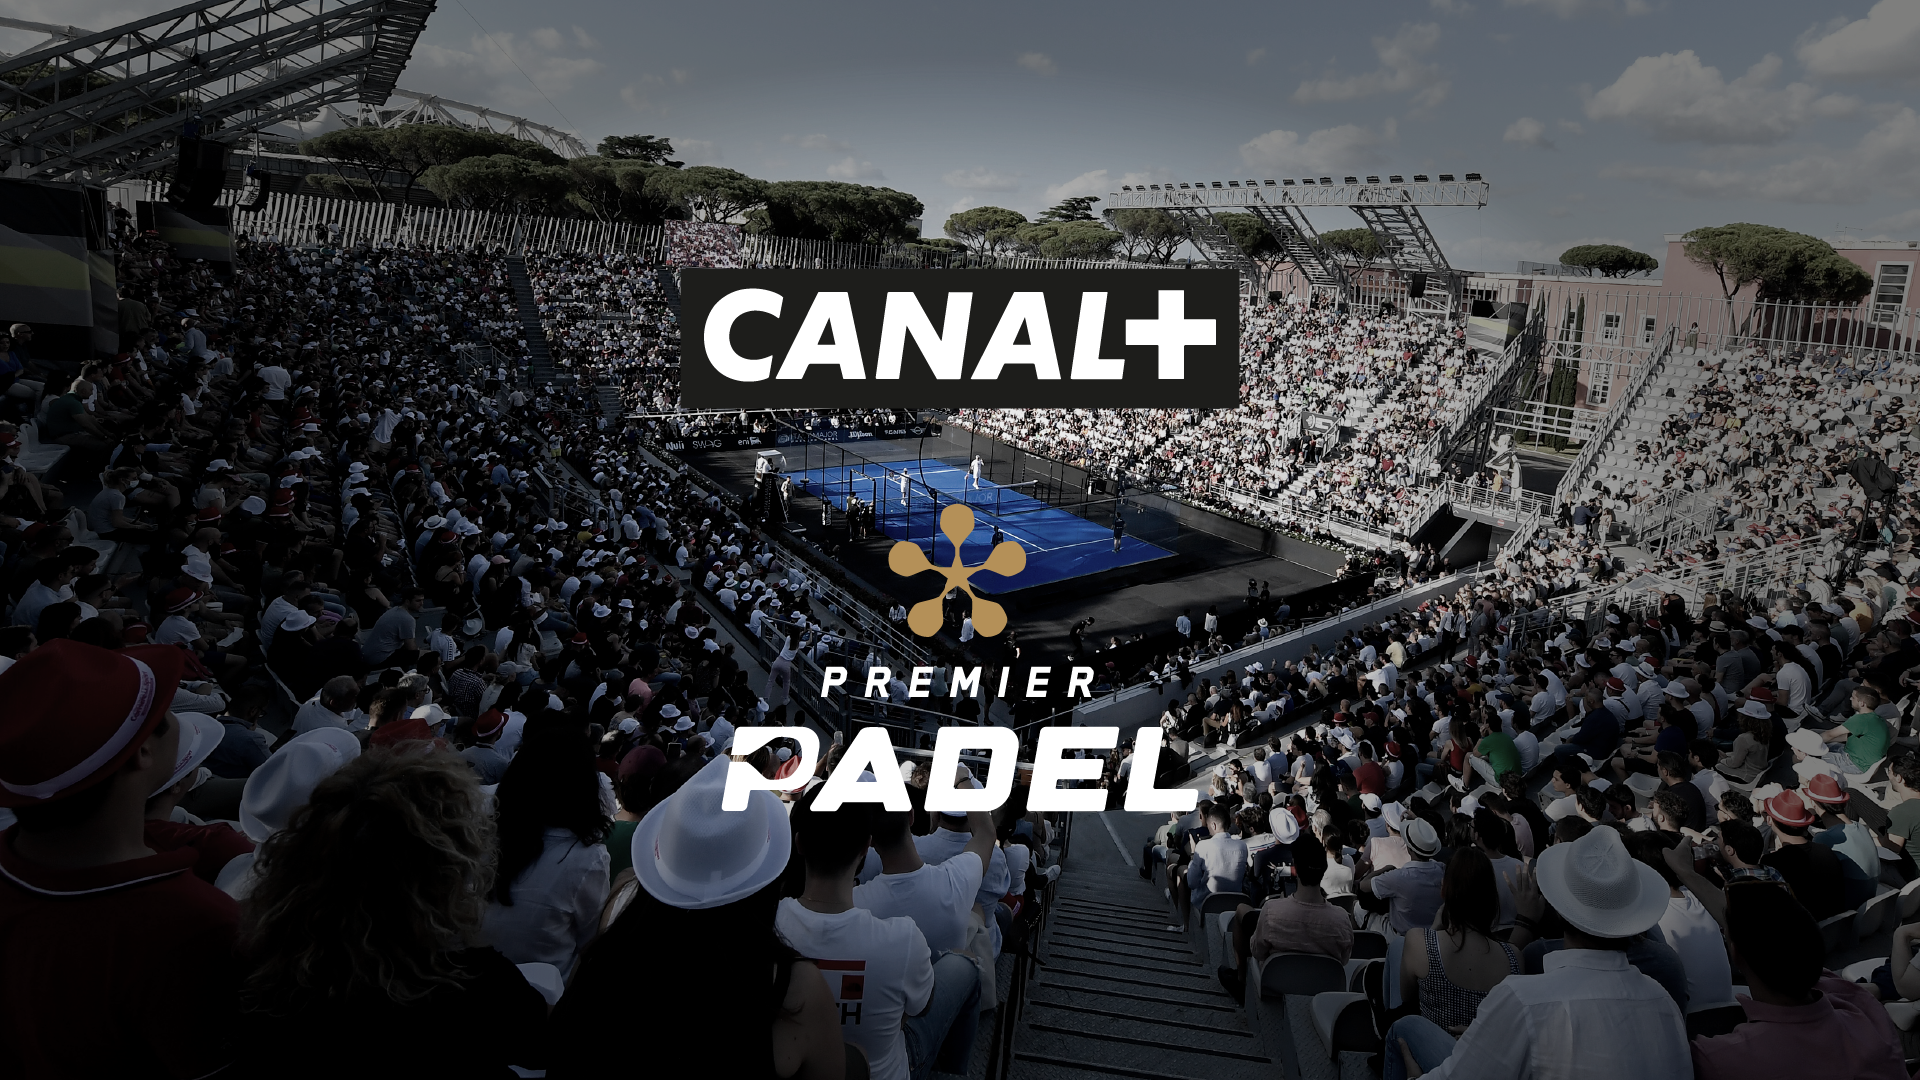 CANAL+'s coverage of the Premier Padel Tour is due to begin next week with the Paris Premier  Padel Major ©Premier Padel